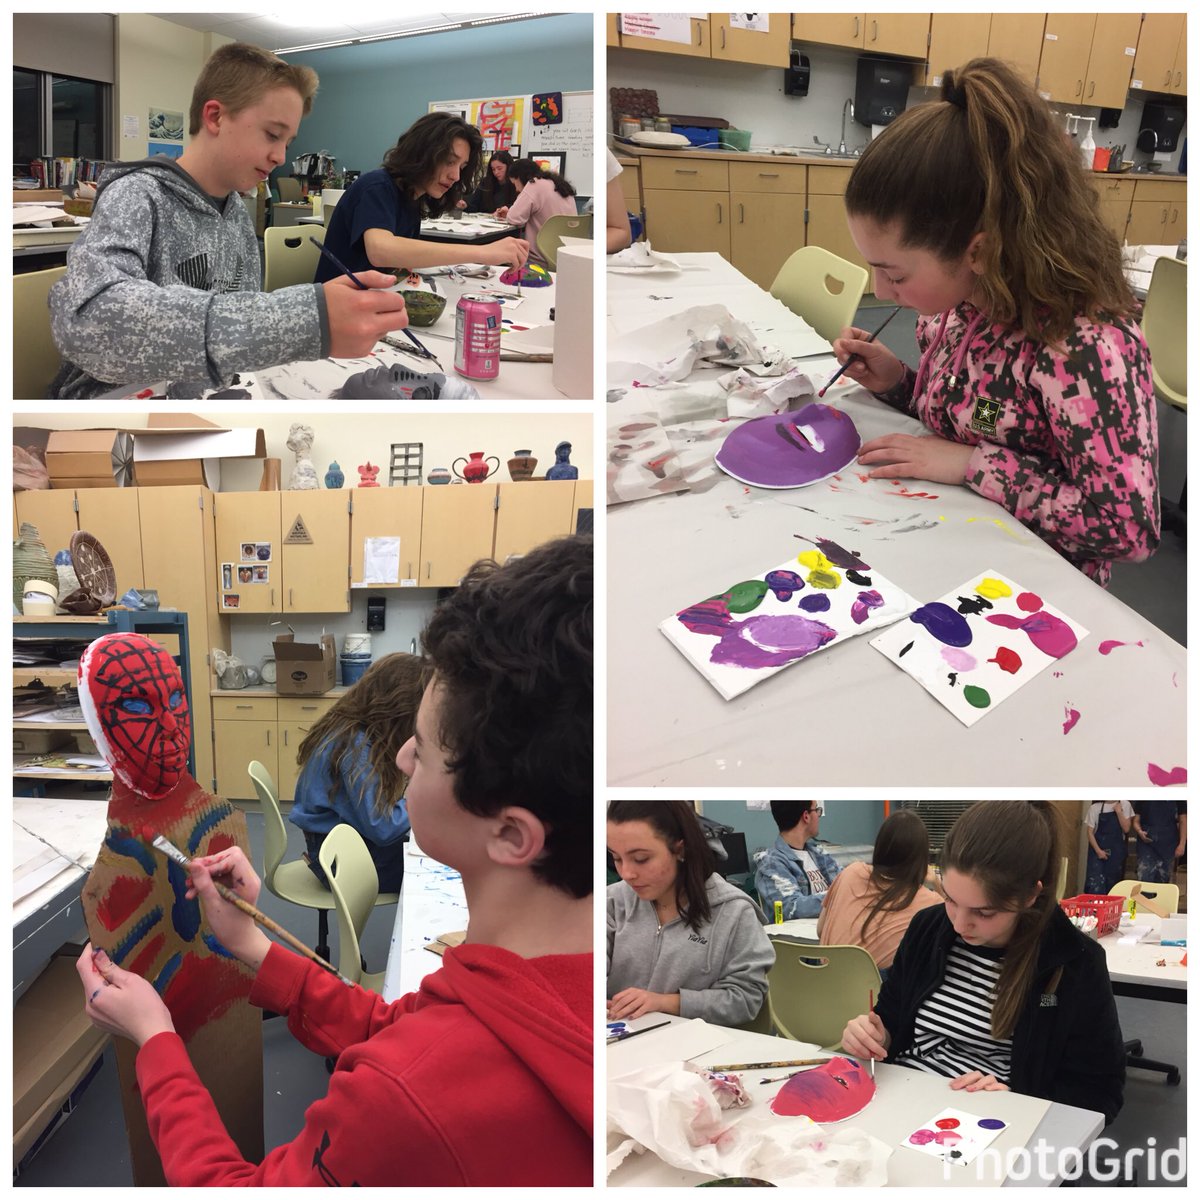 MERHS chapter of NAHS sponsors MS Art Night tonight.  Creative workshops:  mask/watercolor painting, mini accordion books & digital zombies!
Thanks to all our members for supporting our event! #artthriveshere